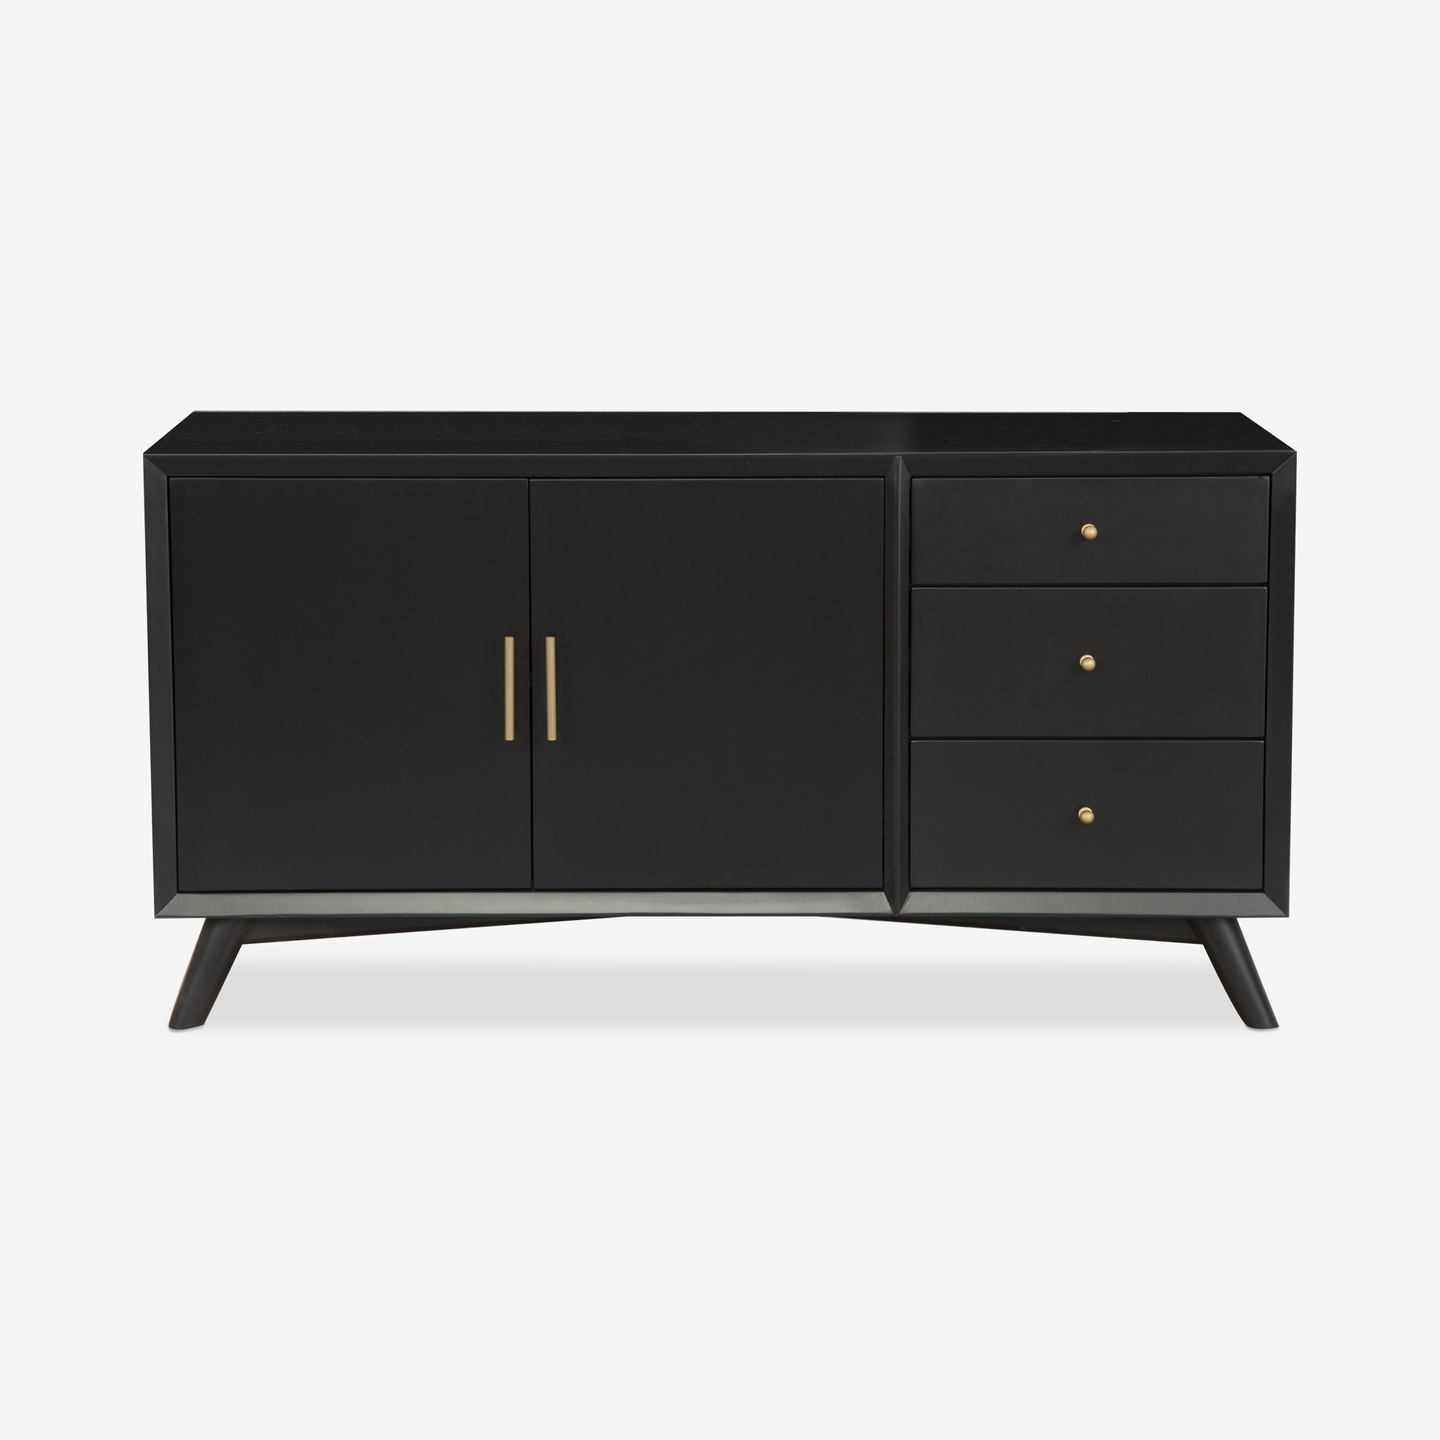 1402_Cheney-Sideboard-Black_Front_2021